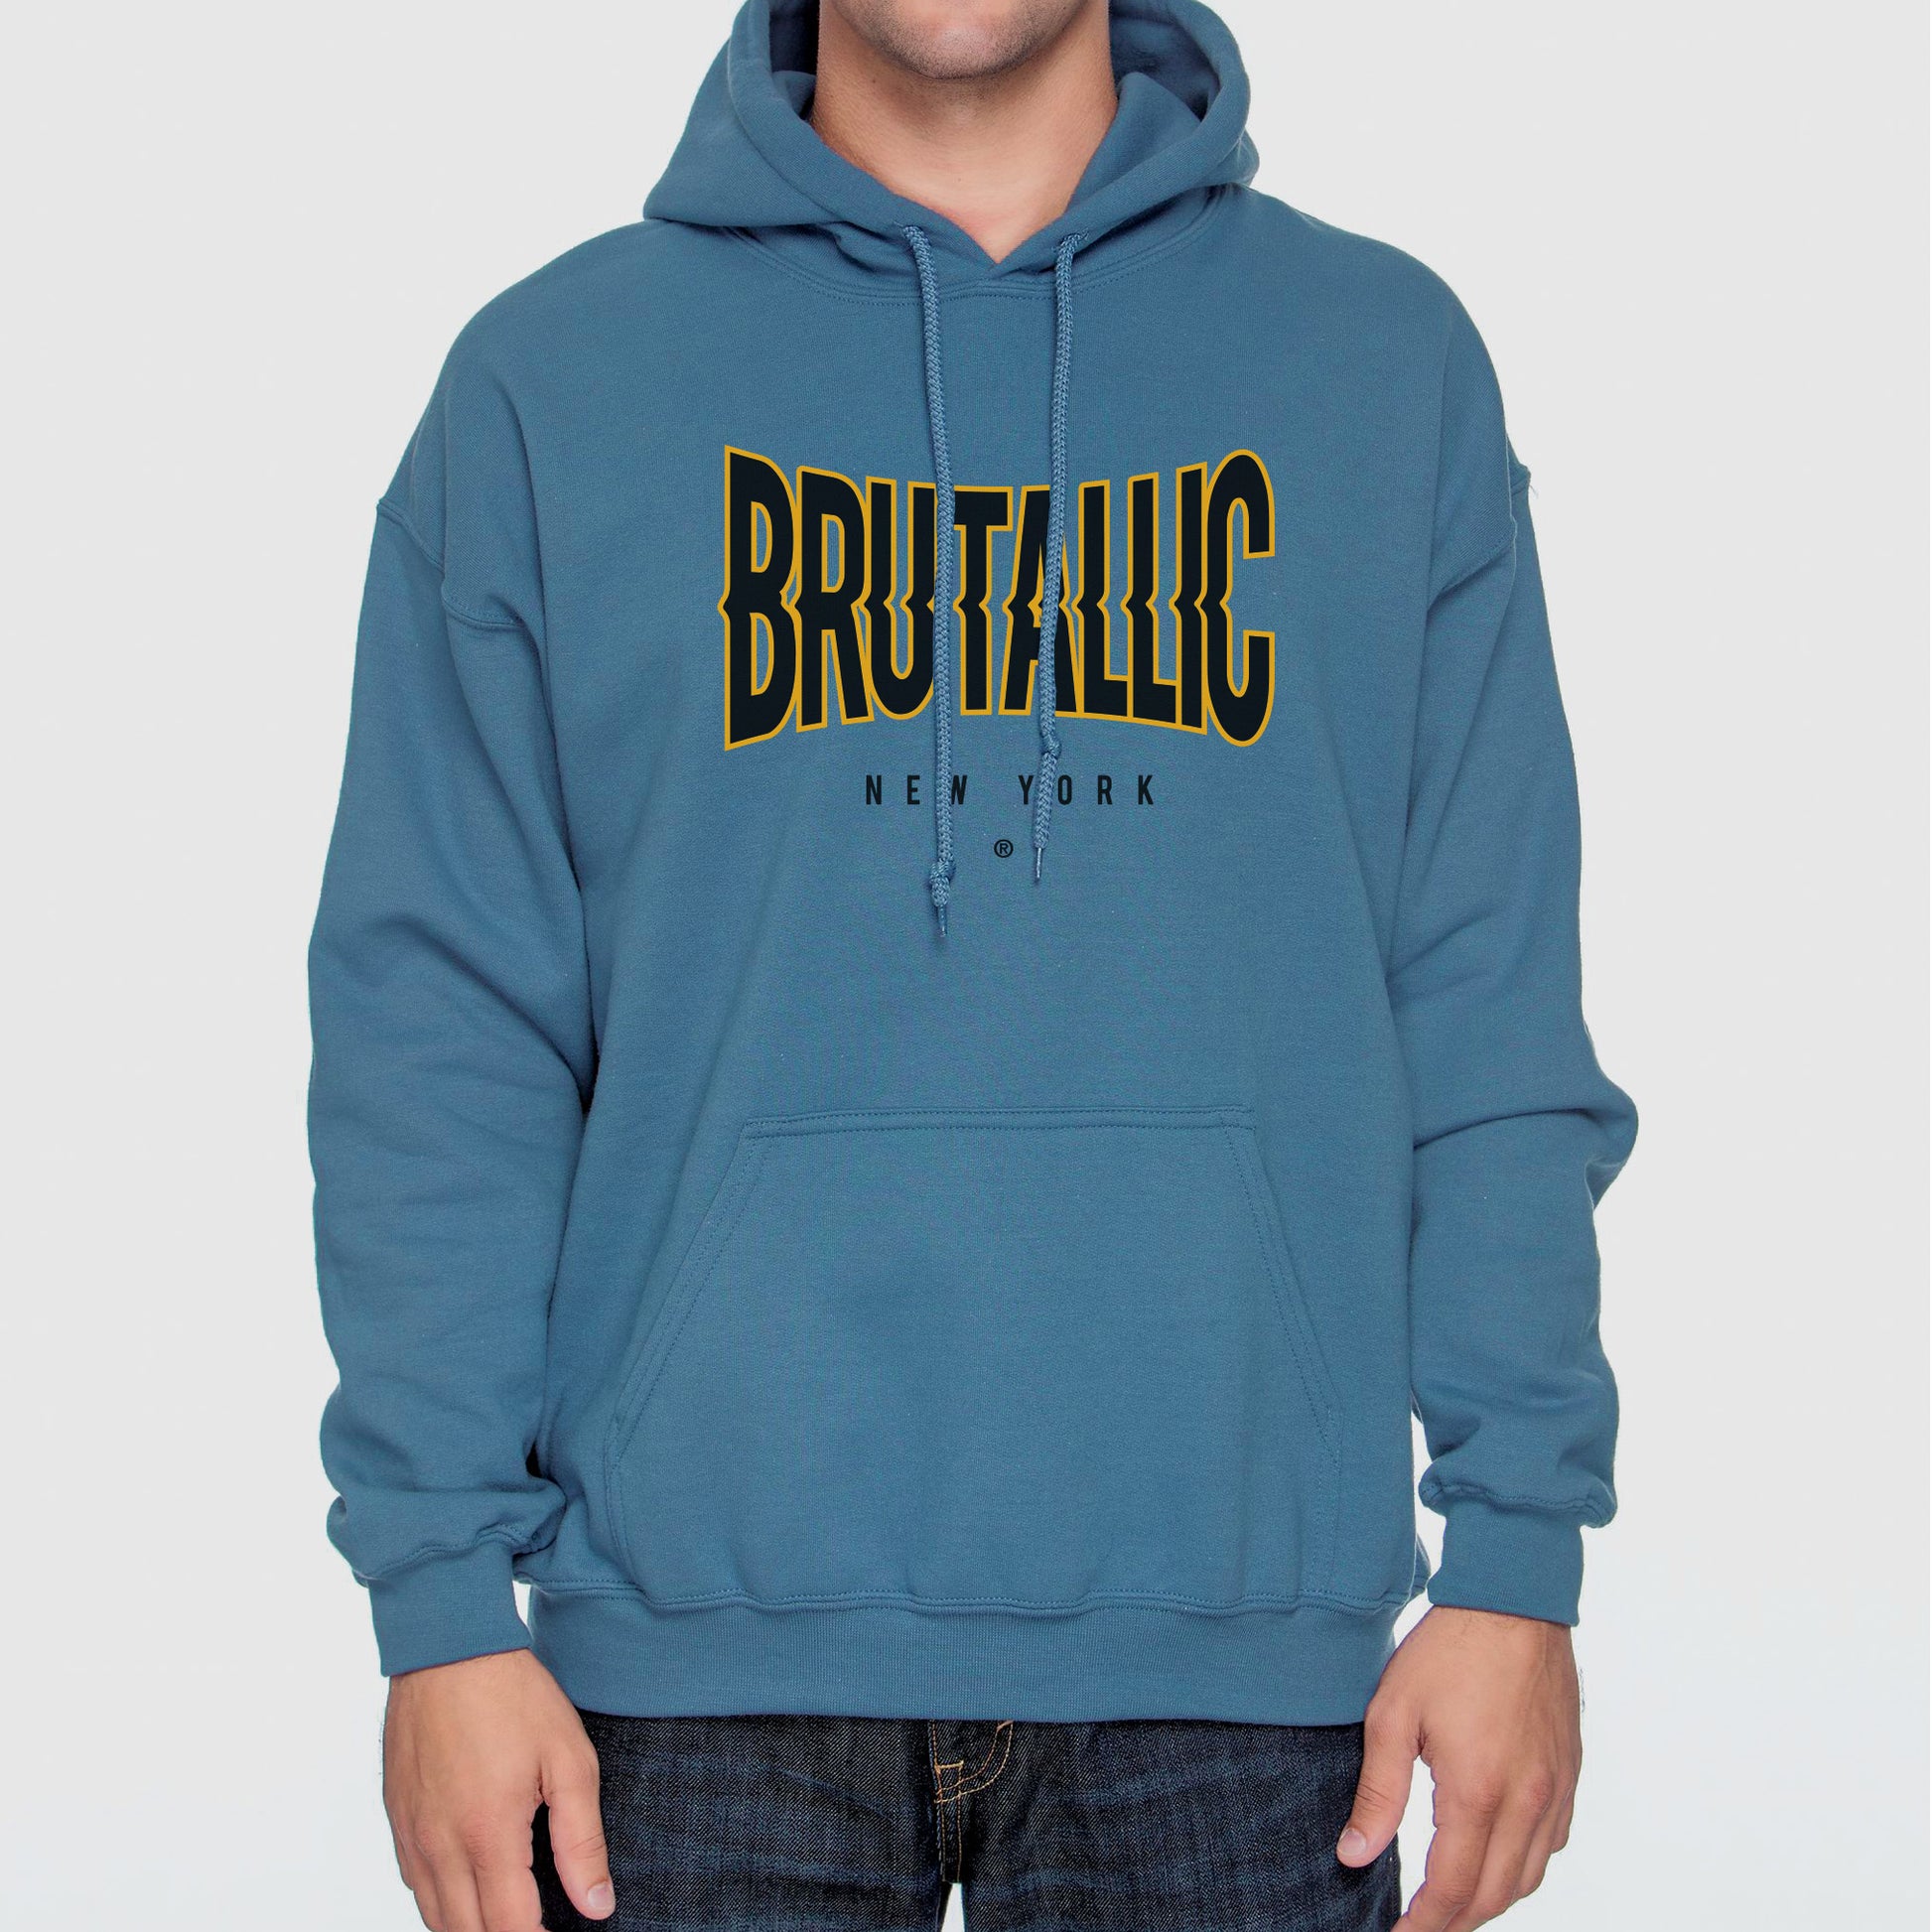 indigo blue hoodie sweatshirt worn by male model front view with disrupted brutallic logo